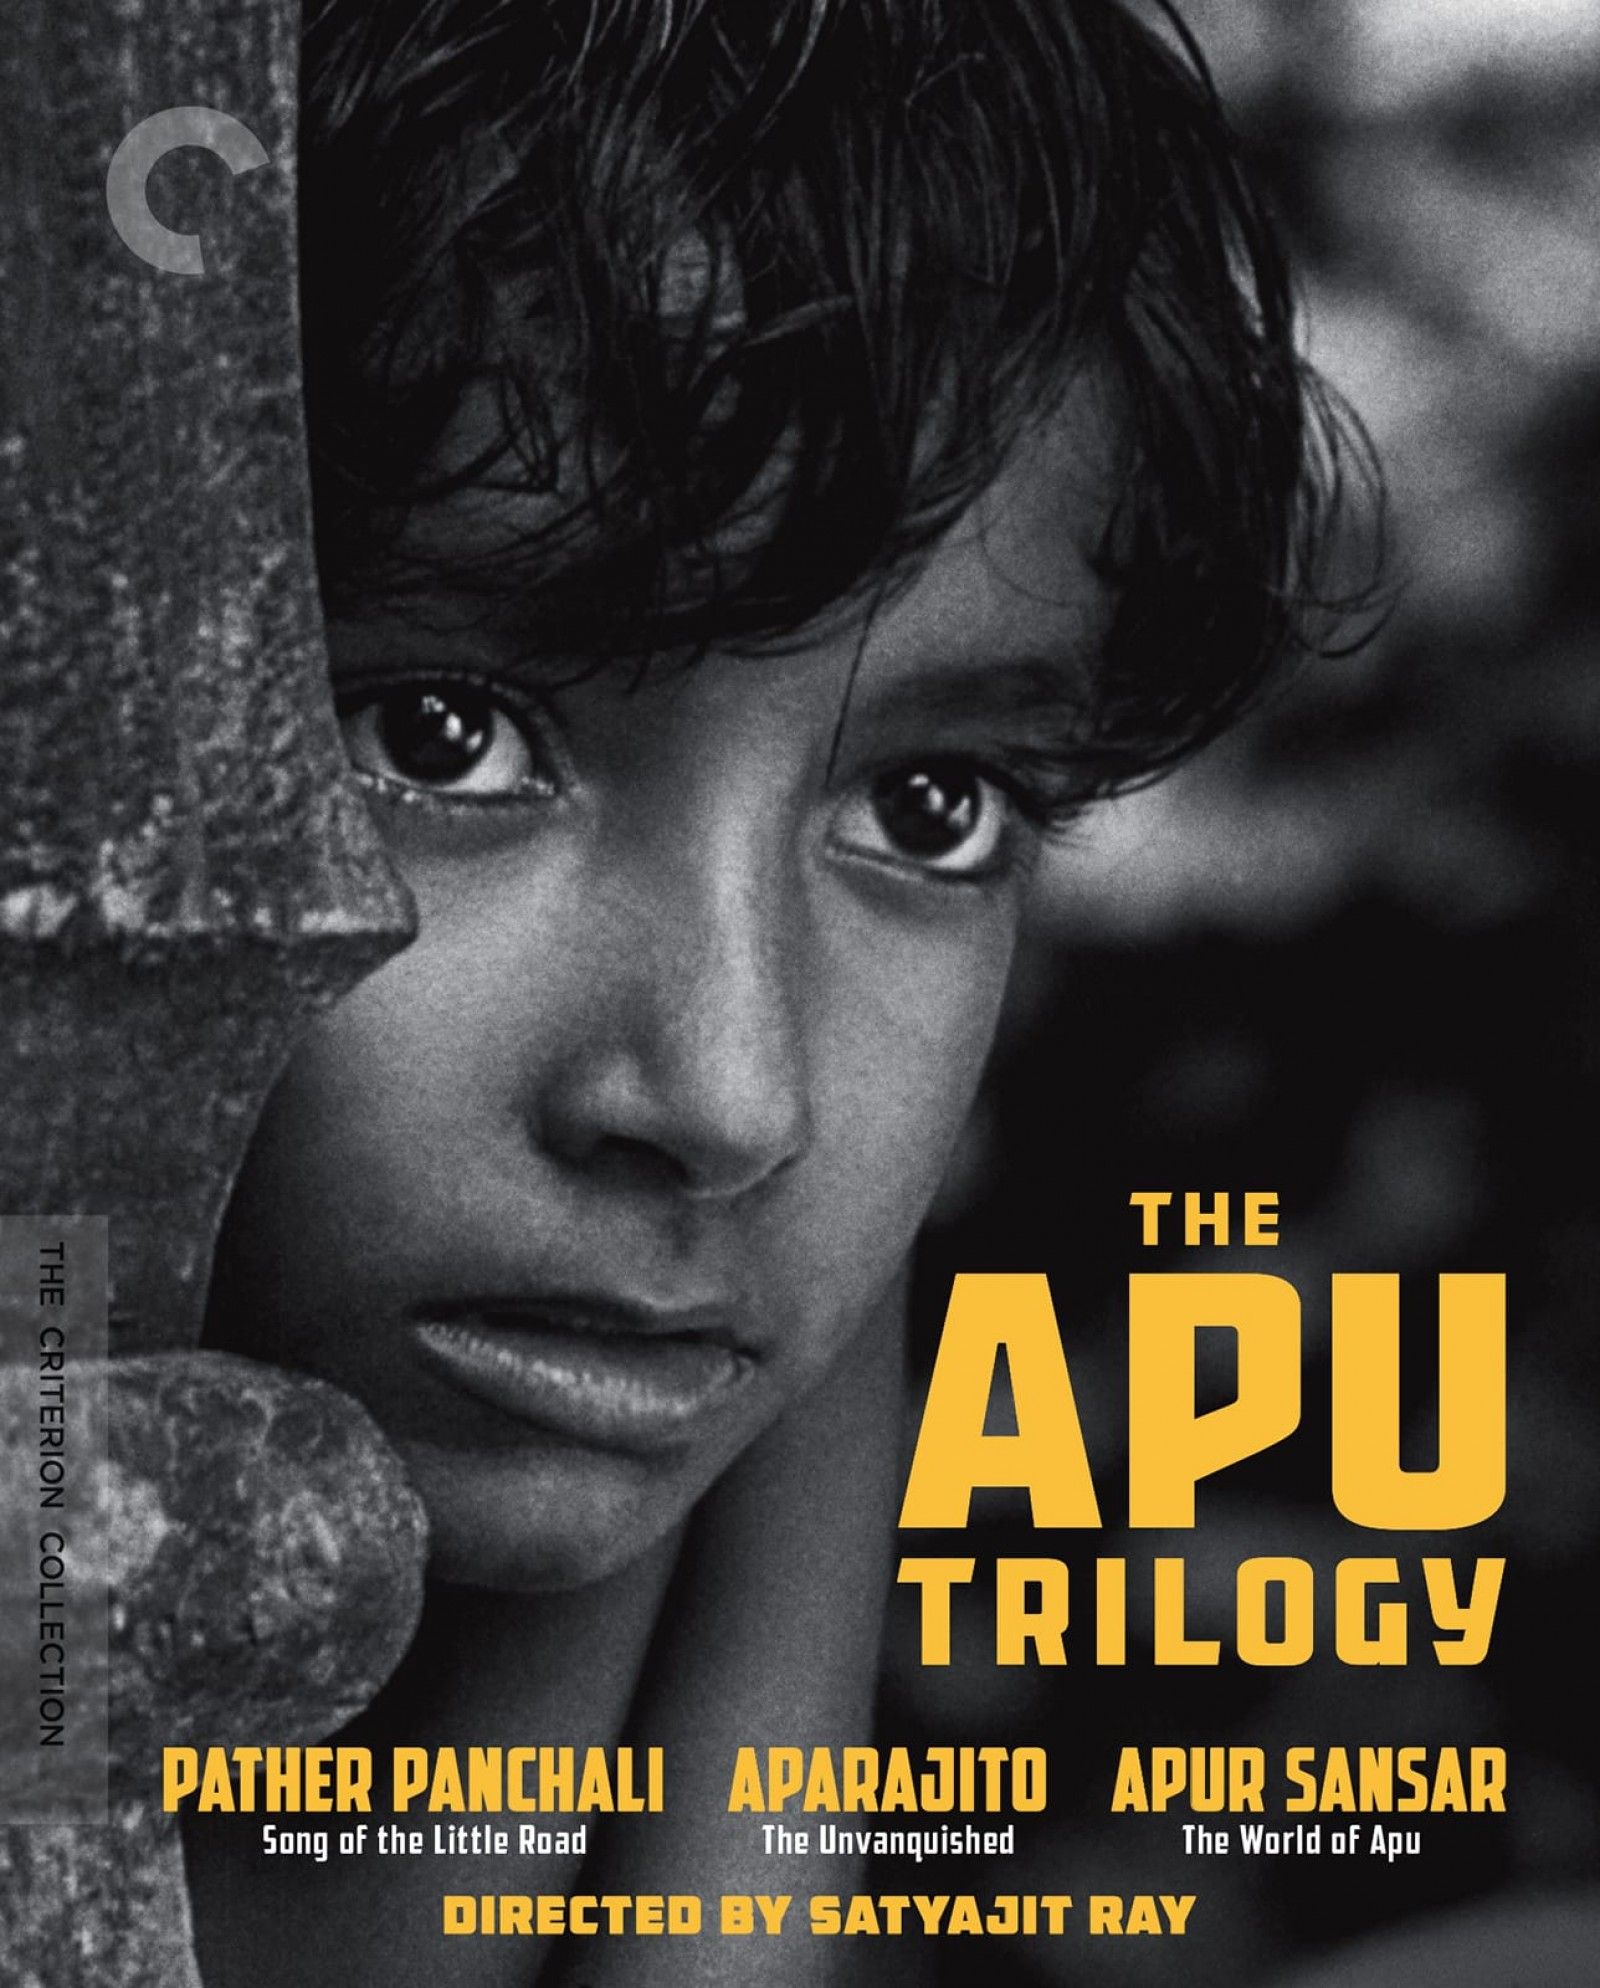 The Apu Trilogy. The Criterion Collection